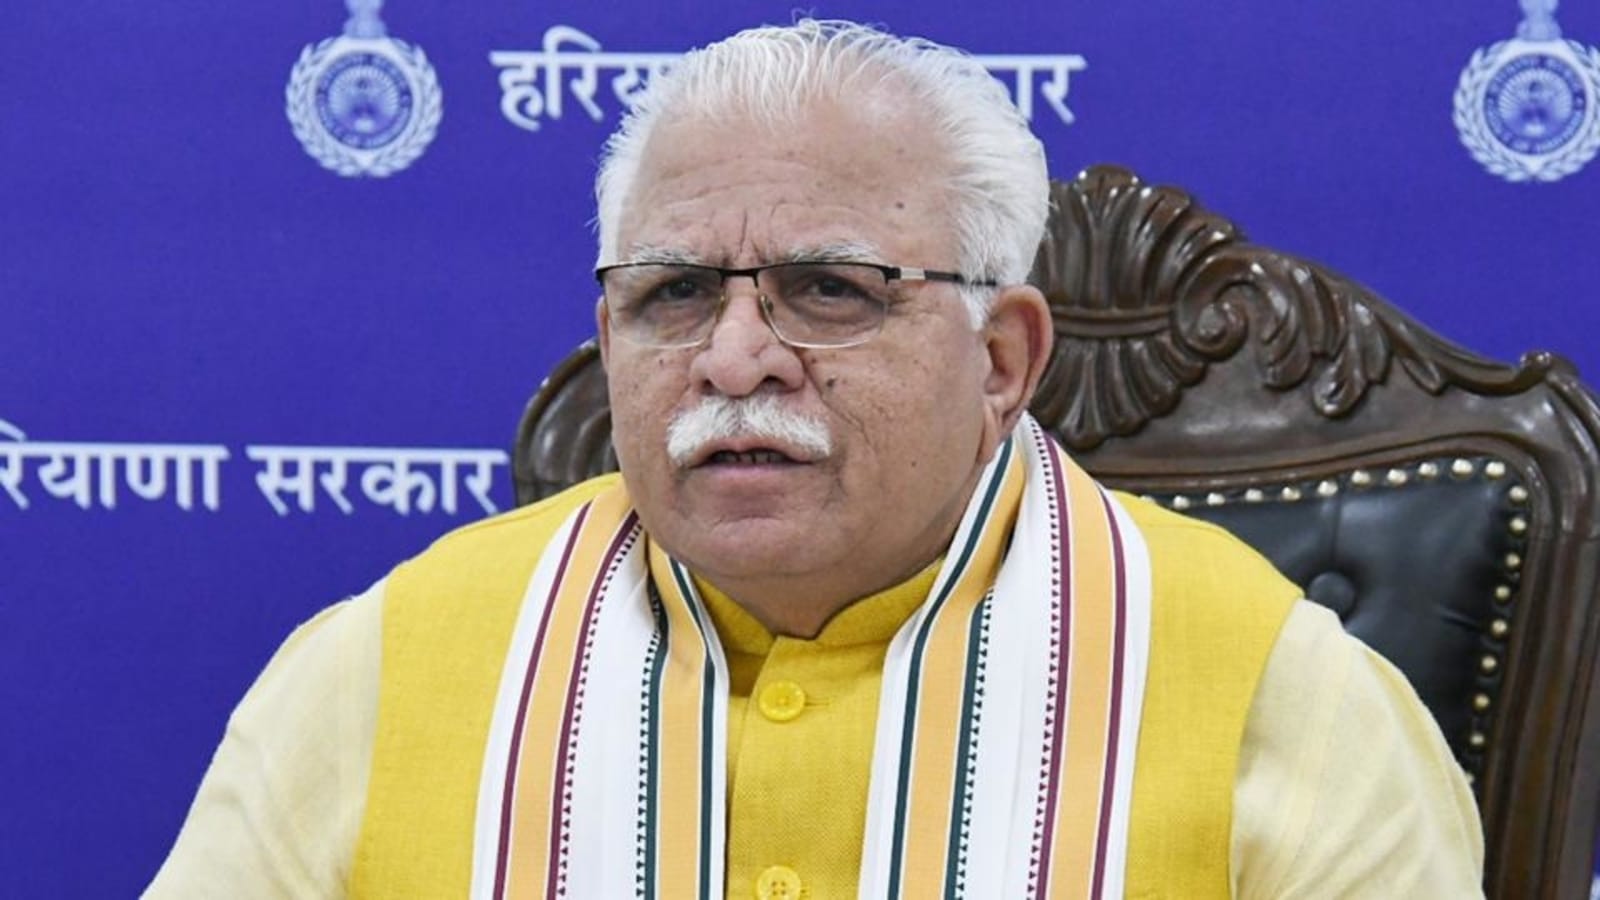 Haryana CM likely to meet PM Modi, issues around farm laws may be